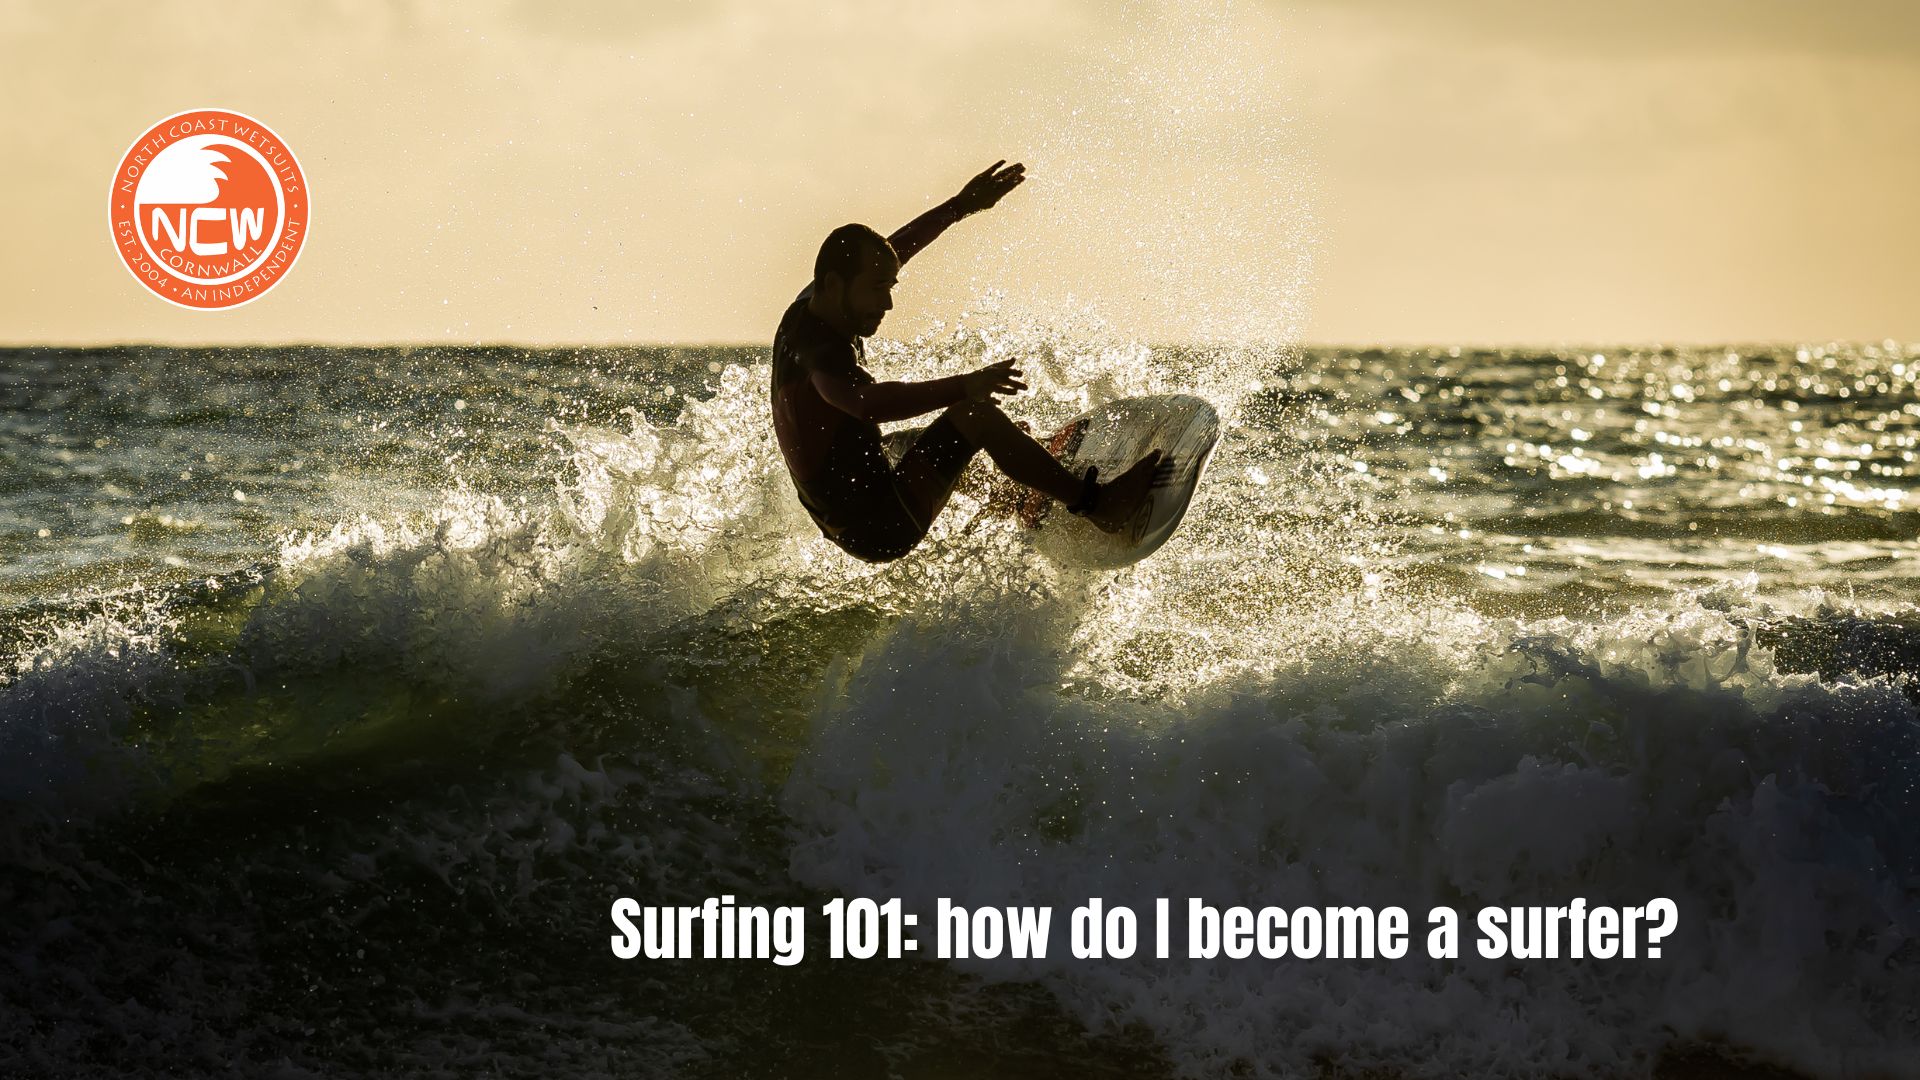 SUP Surfing 101 